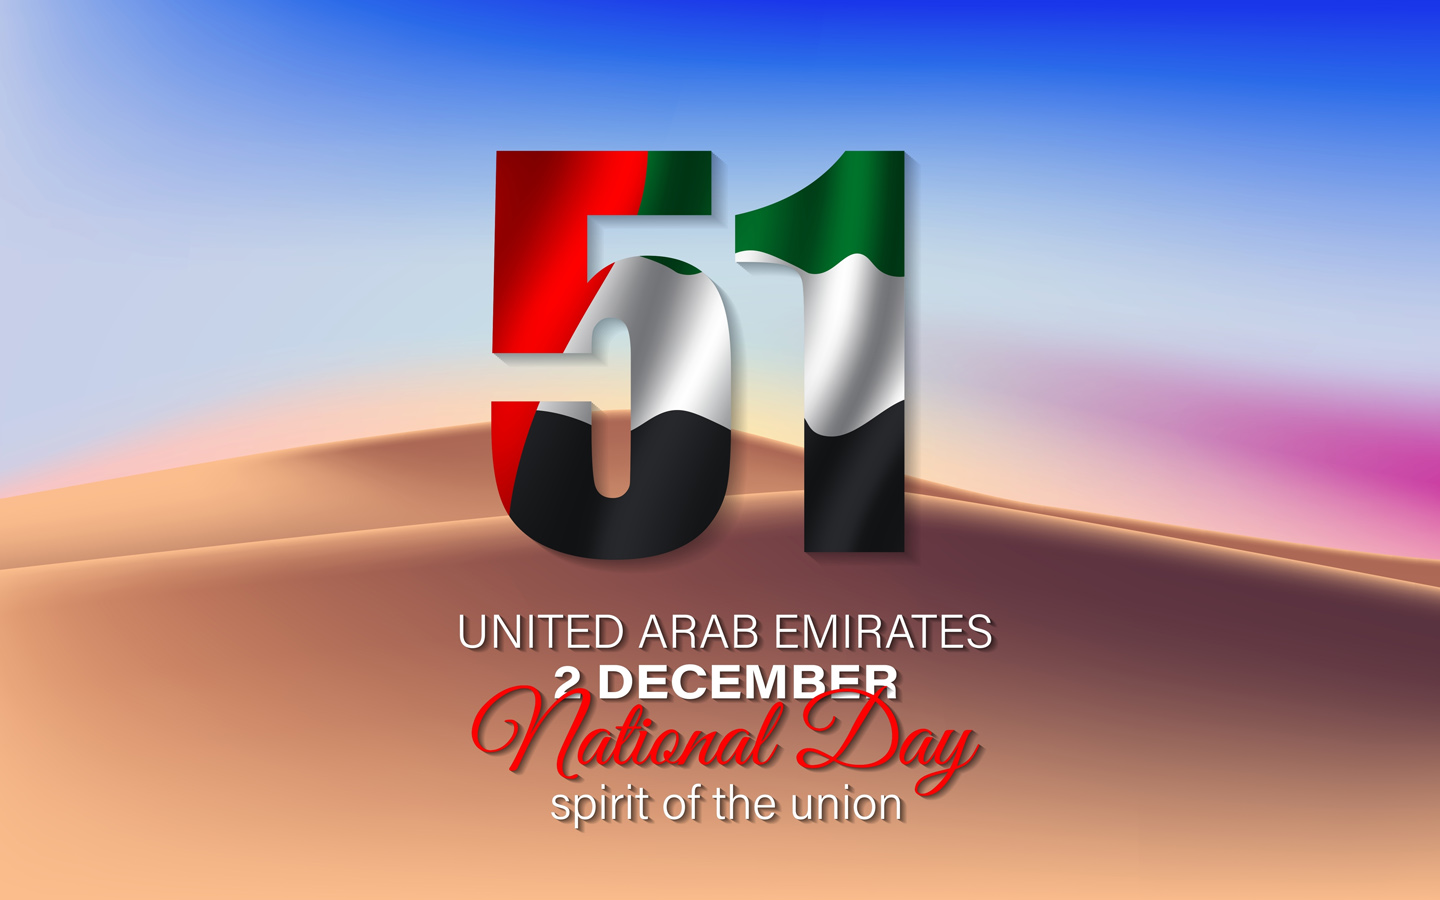 51st National Day celebrations with home decor ideas